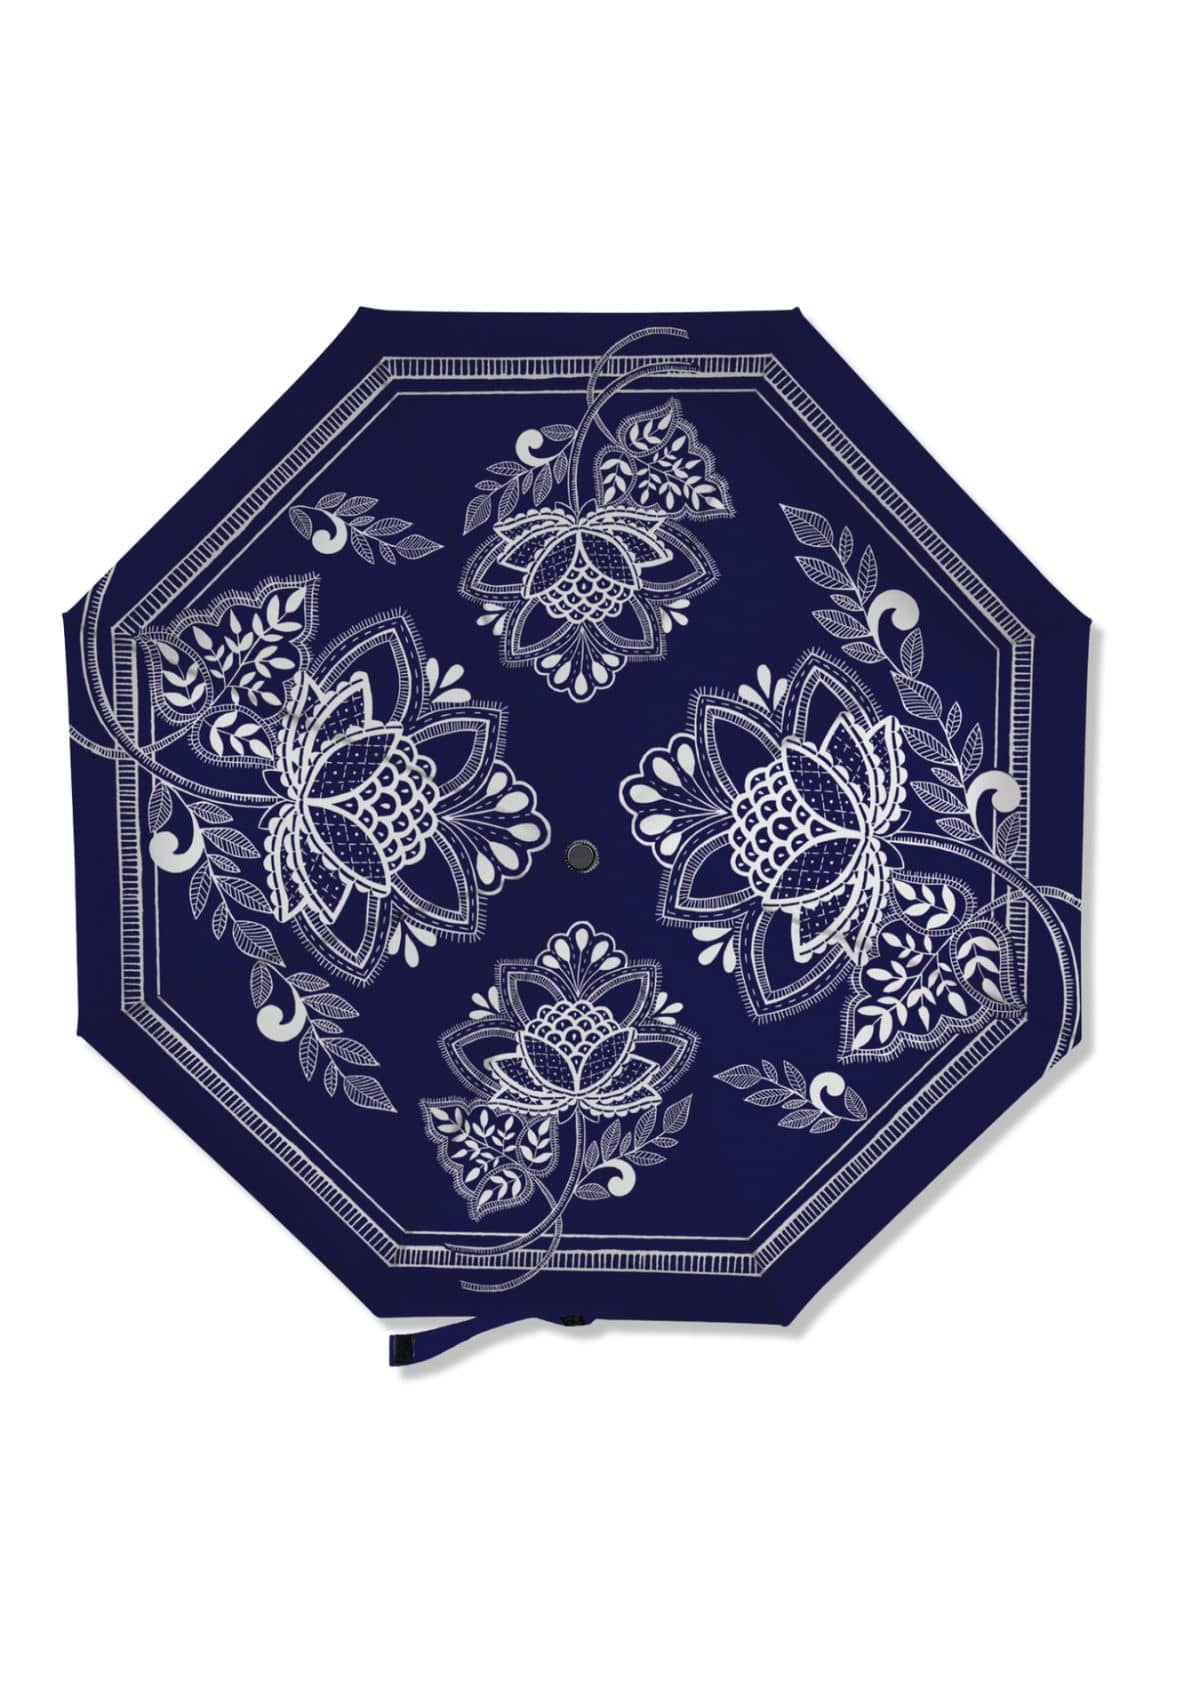 August Compact Manual Umbrella -EVERGREEN TRADING CO LOS ANGEL- Ruby Jane-